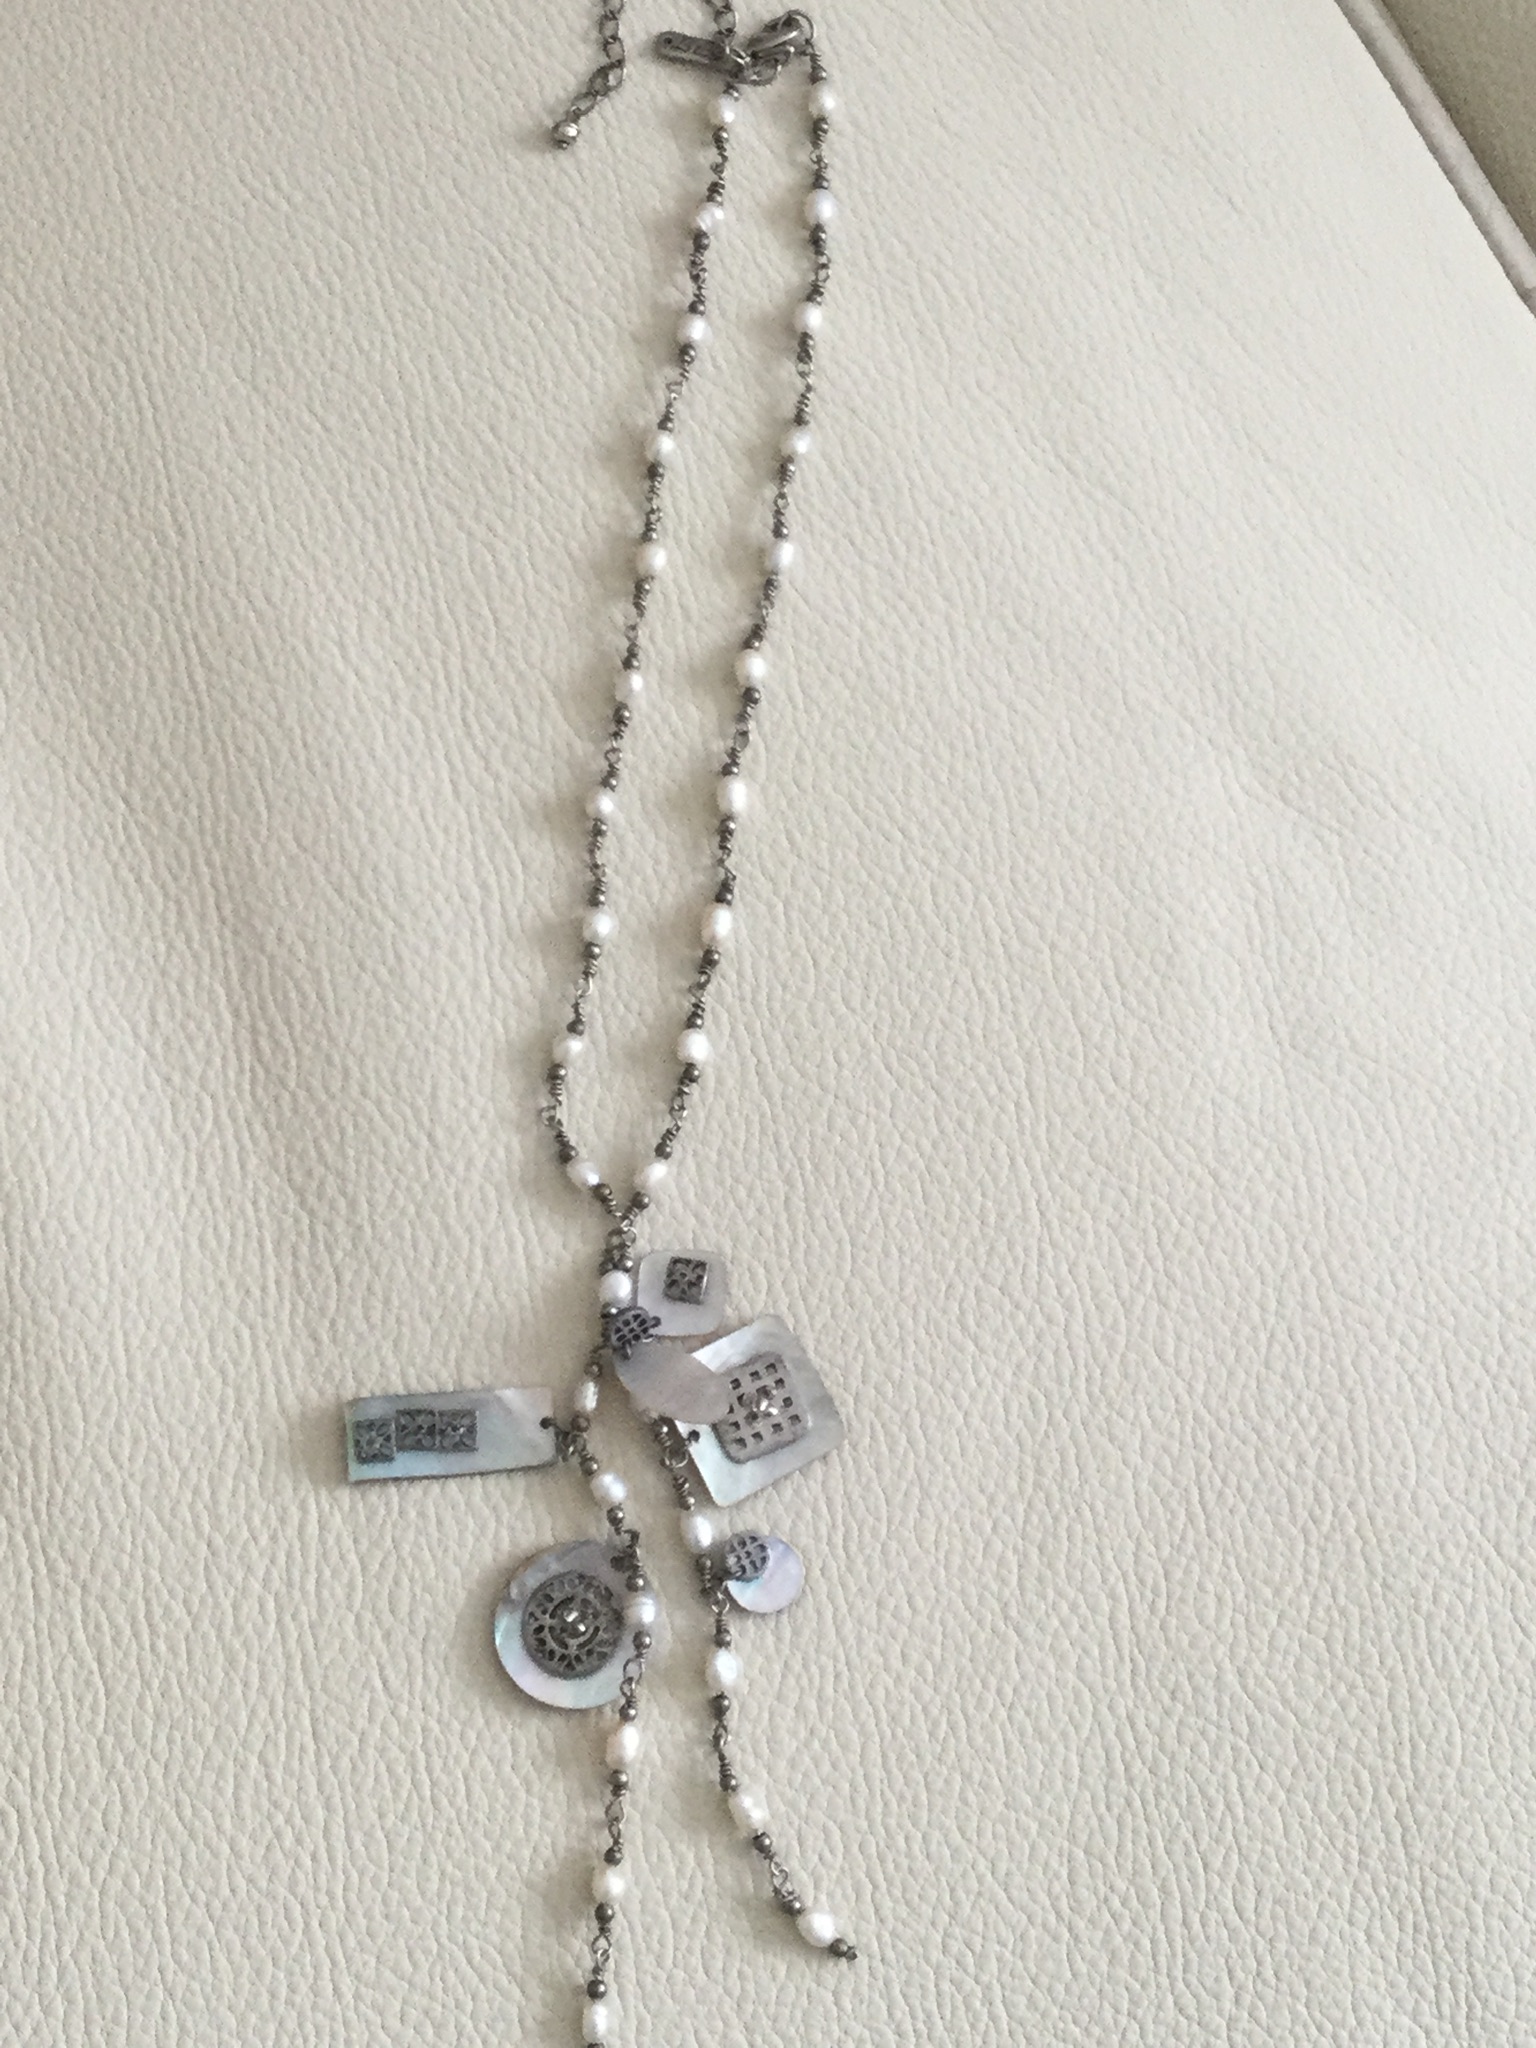 Boutique Rice/ Seed Pearl Necklace With Mother Of Pearl Tassle - Image 5 of 6